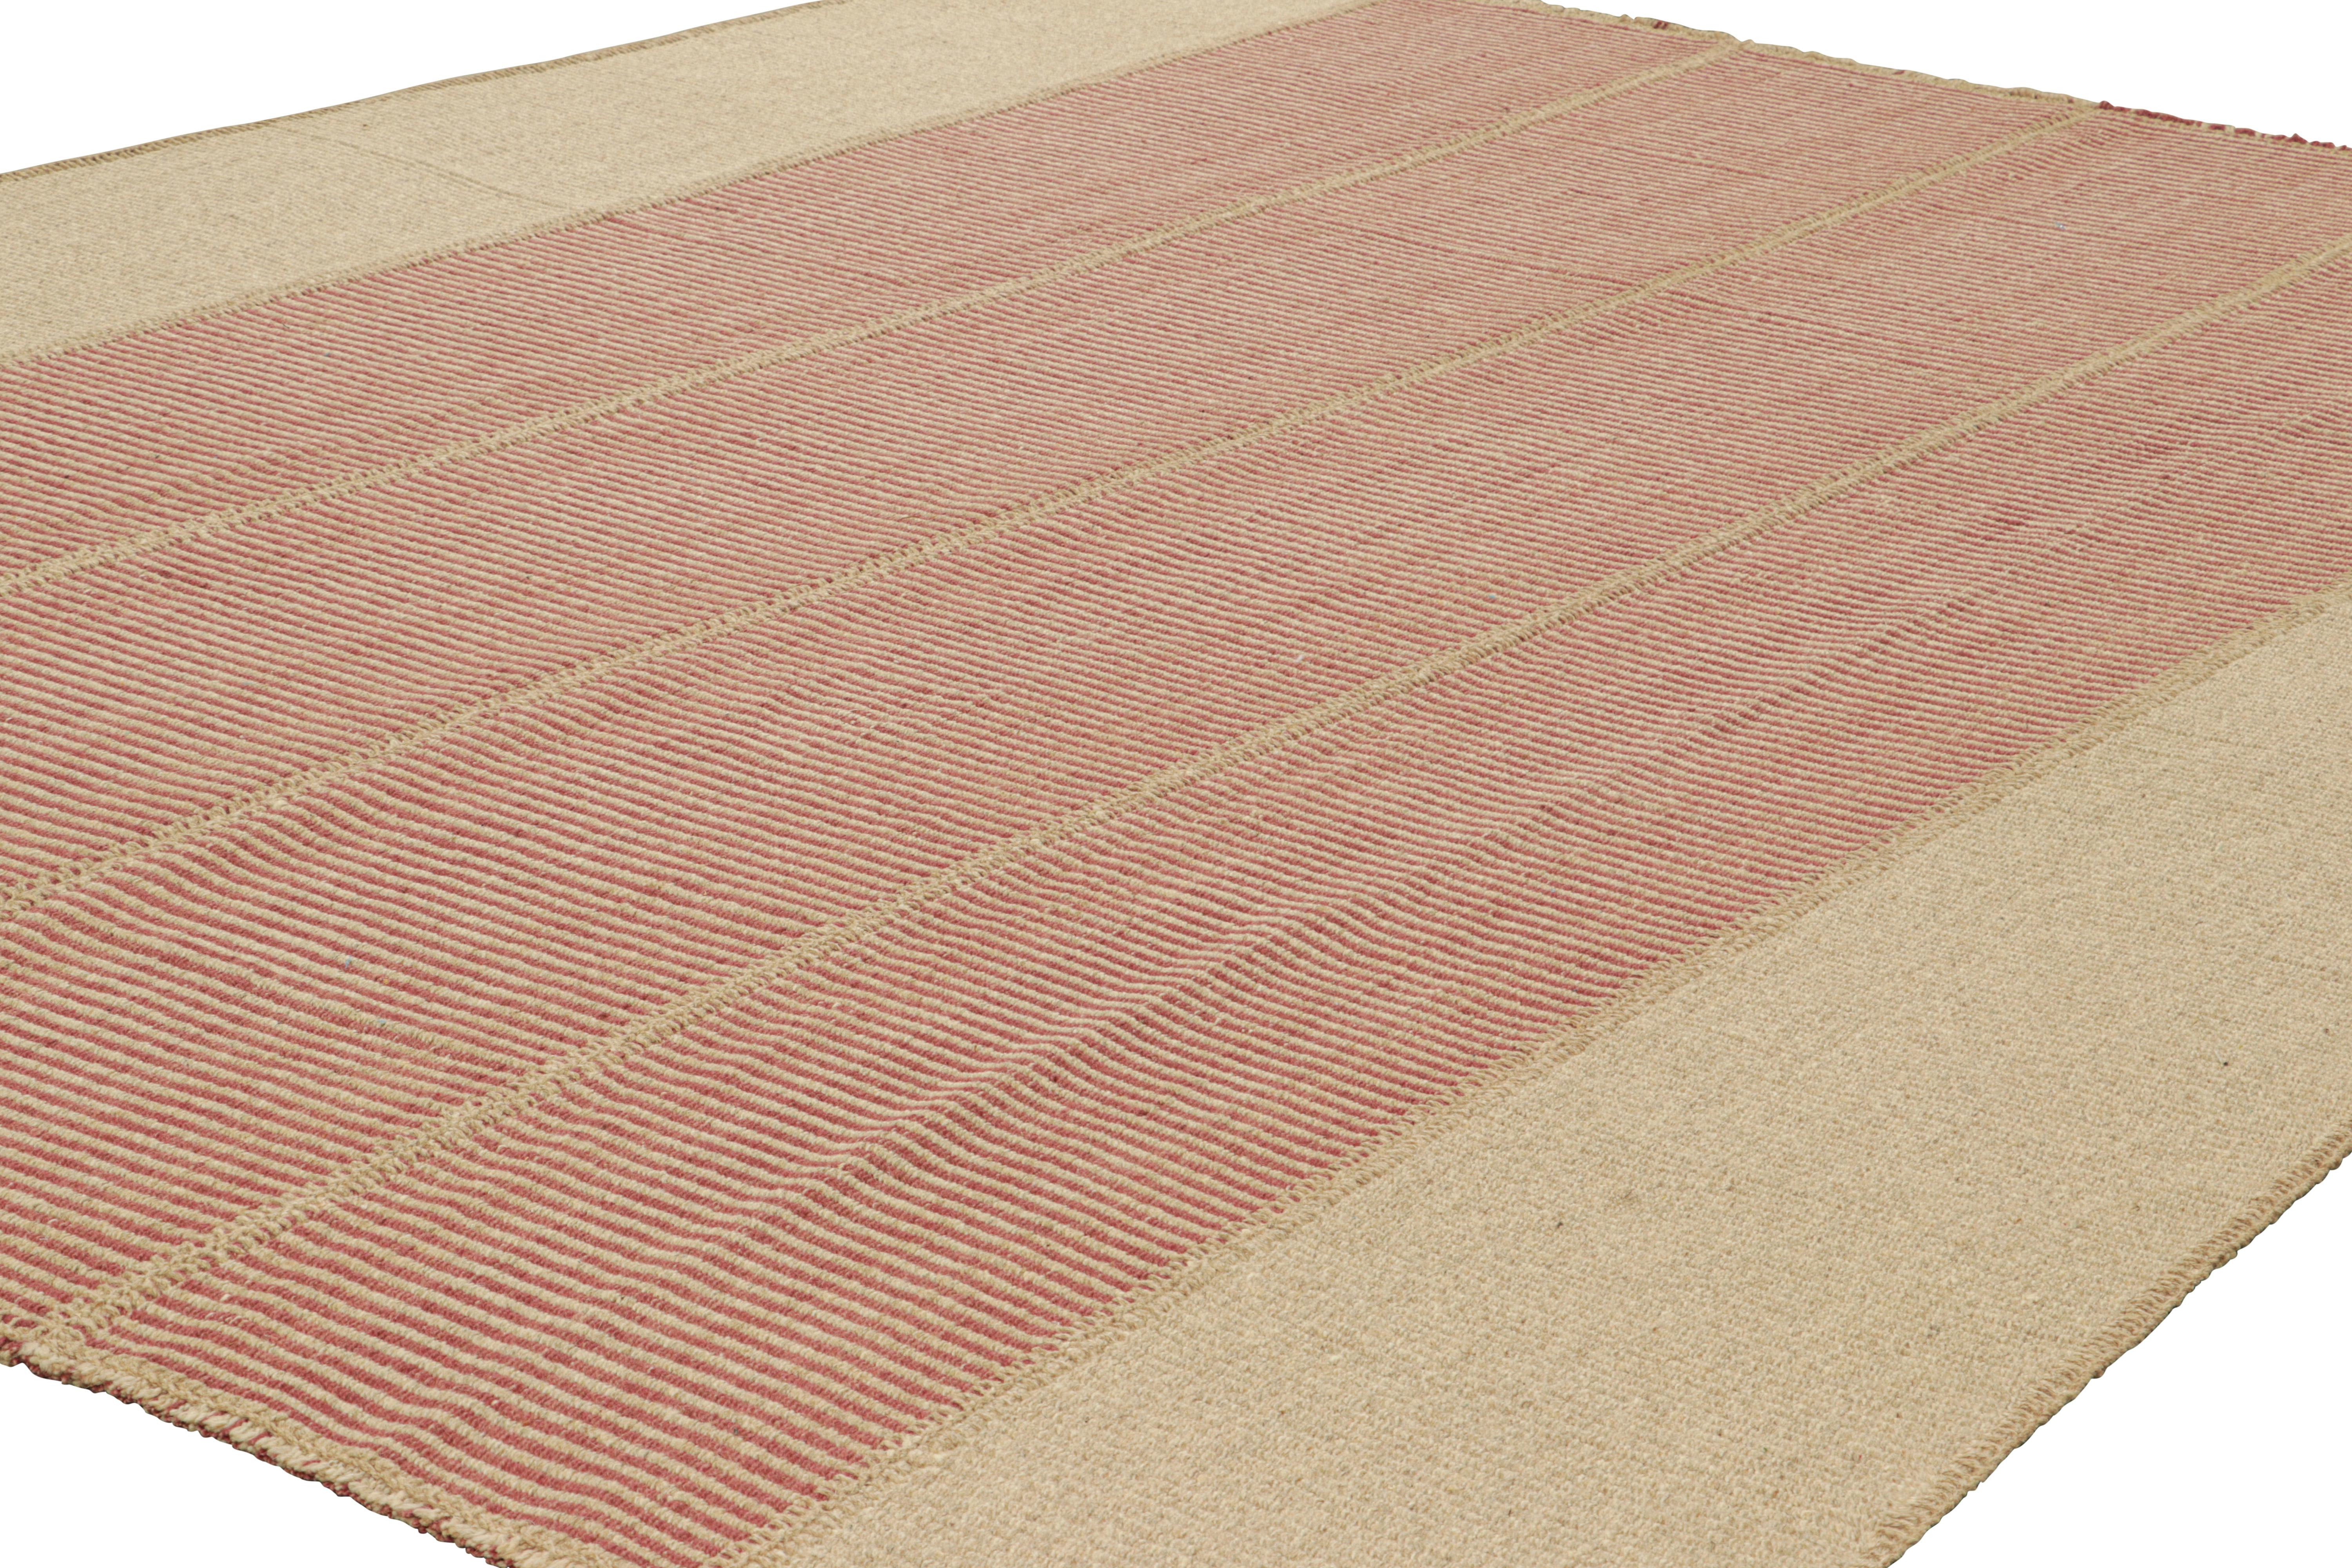 Afghan Rug & Kilim’s Contemporary Kilim in Beige and Red Textural Stripes For Sale